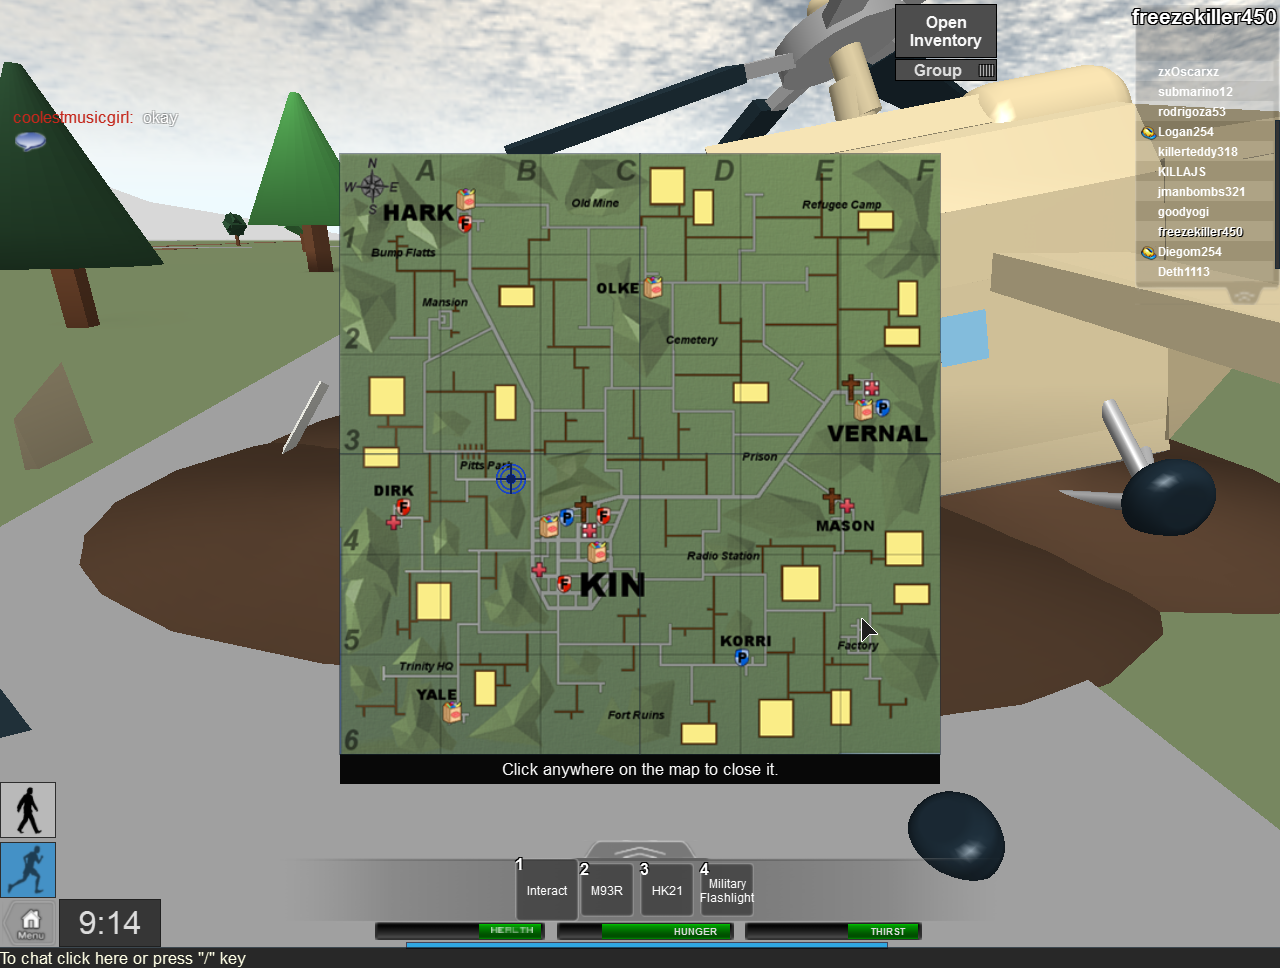 Ar Map Roblox Kin Deataled Photos Download Jpg Png Gif Raw Tiff Psd Pdf And Watch Online - apocalypse rising 2 wiki roblox amino